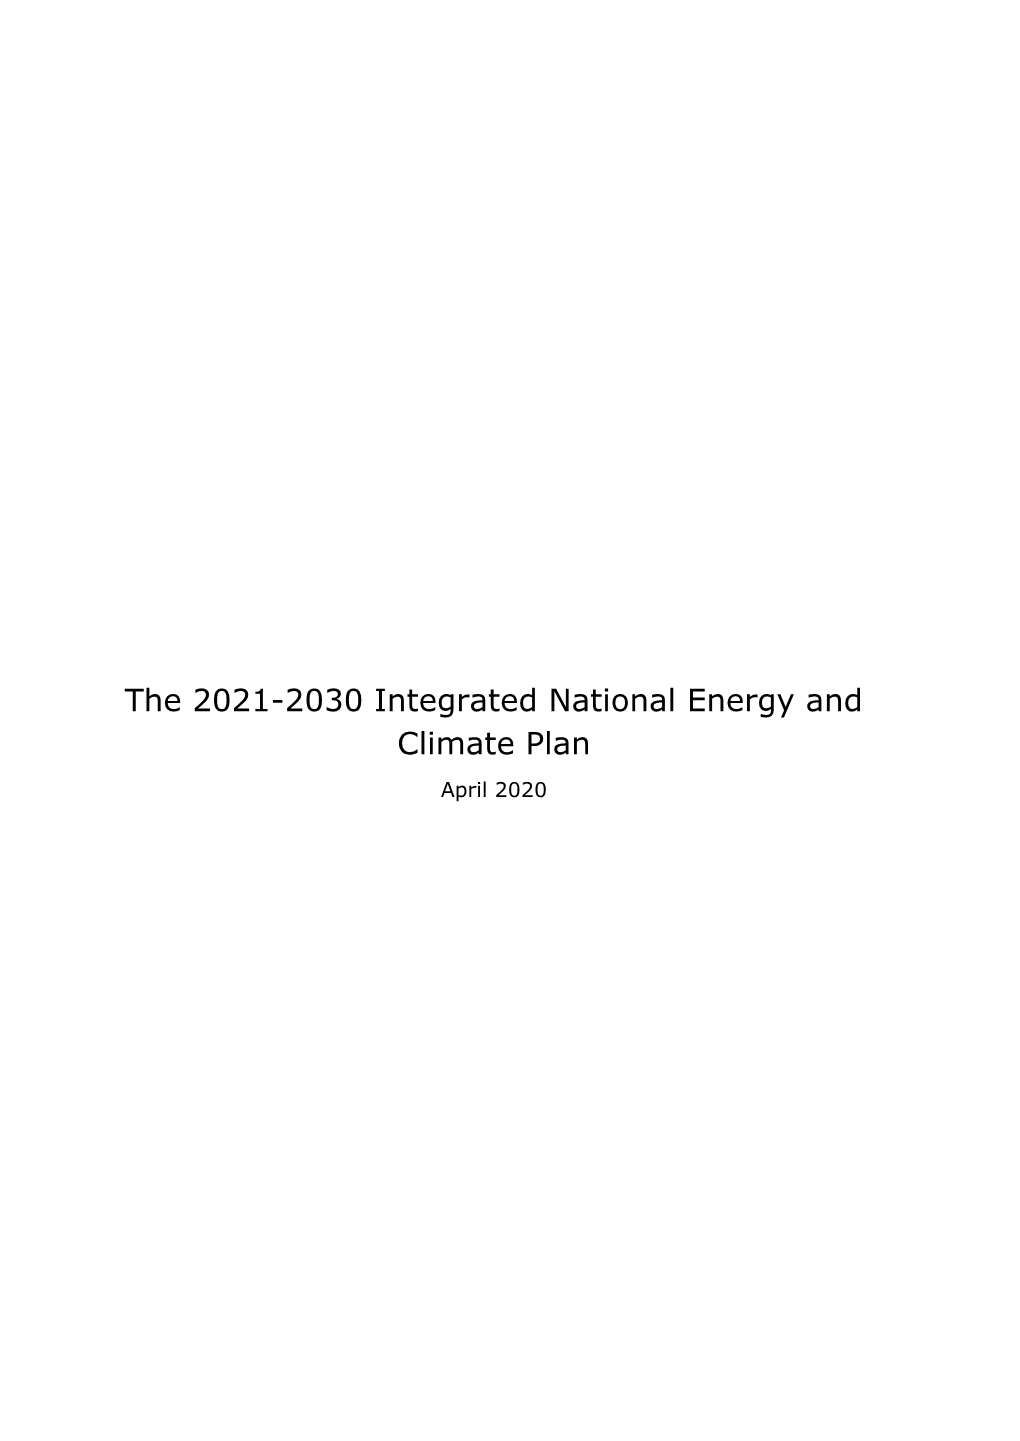 The 2021-2030 Integrated National Energy and Climate Plan April 2020